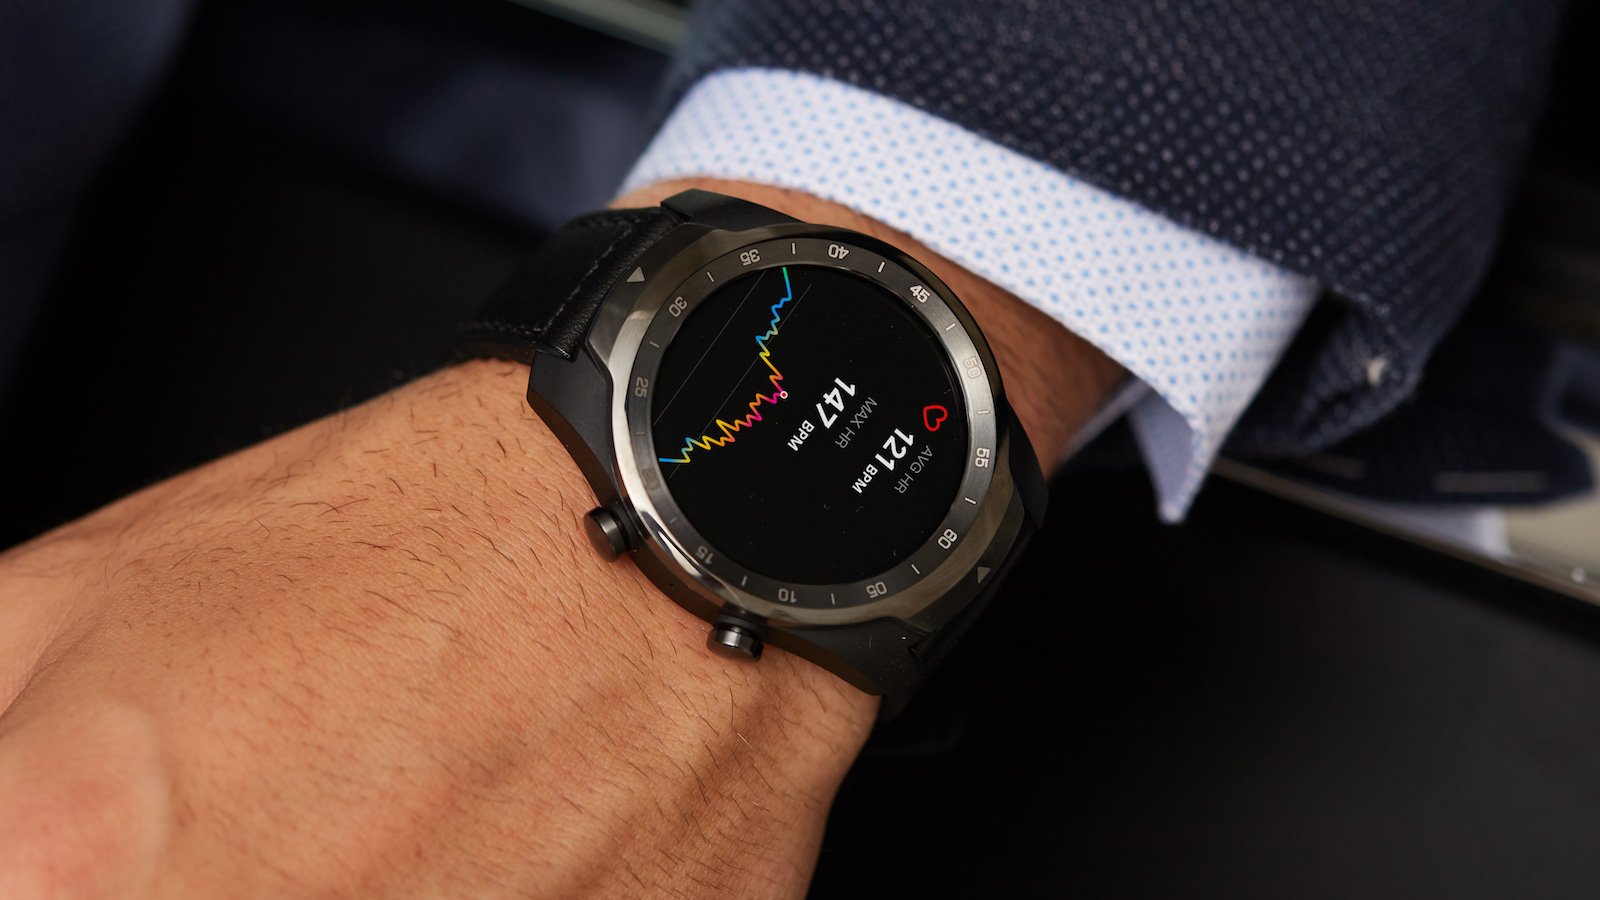 Mobvoi TicWatch Pro S smartwatch features built-in relaxing music to help you sleep